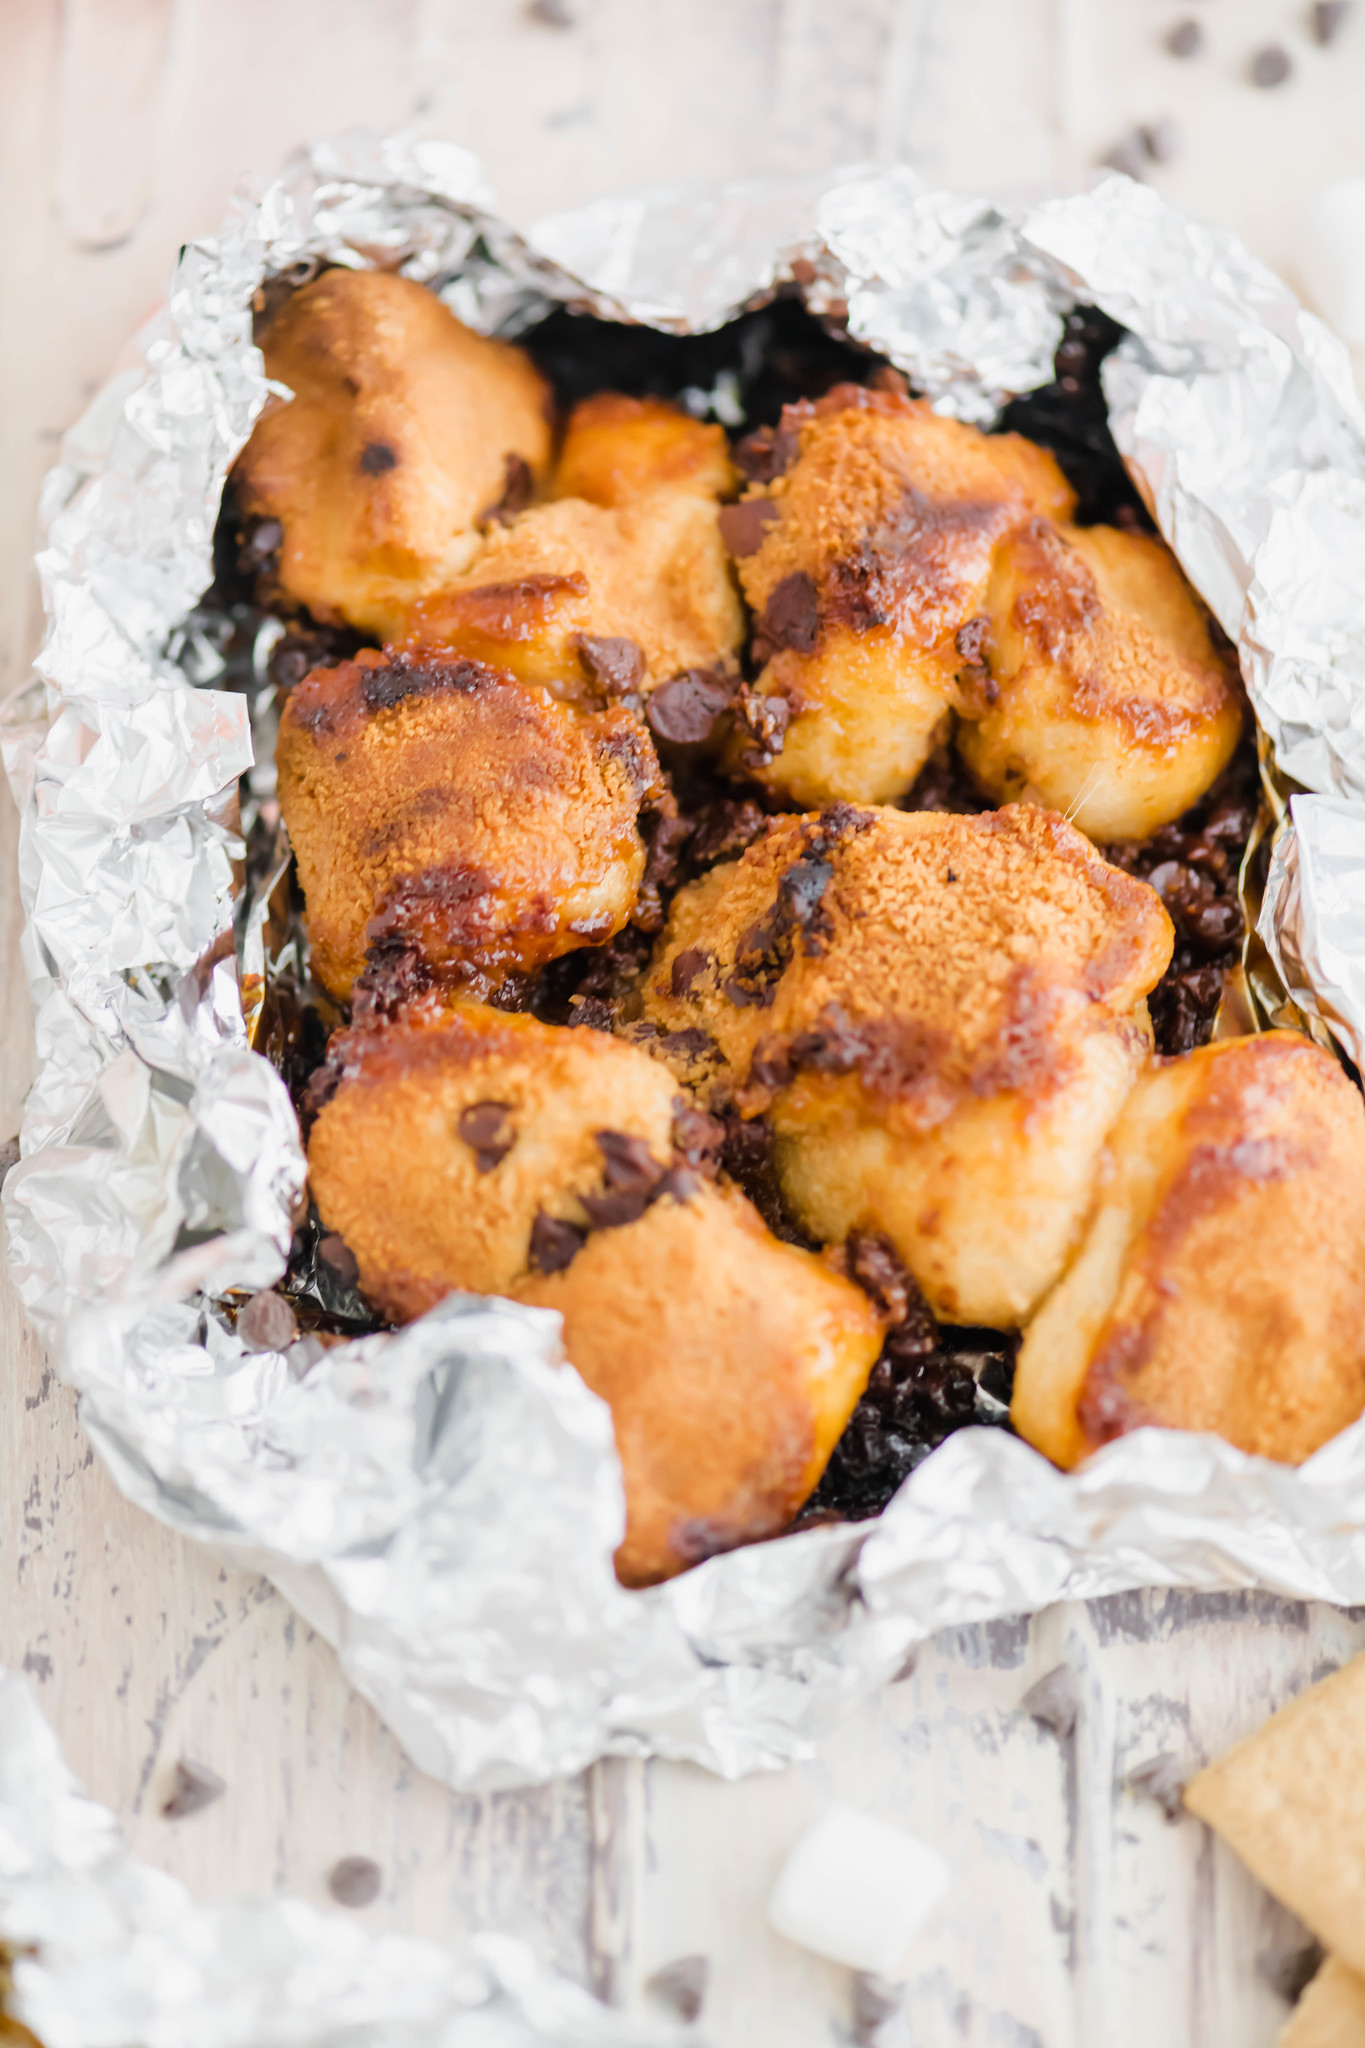 Summertime is upon us and this summer, we’re firing up the grill for a super fun dessert featuring Rhodes Bake-N-Serv rolls. This Campfire S’mores Monkey Bread is super simple to make on the grill or in the oven for a fun spin on a summertime classic.